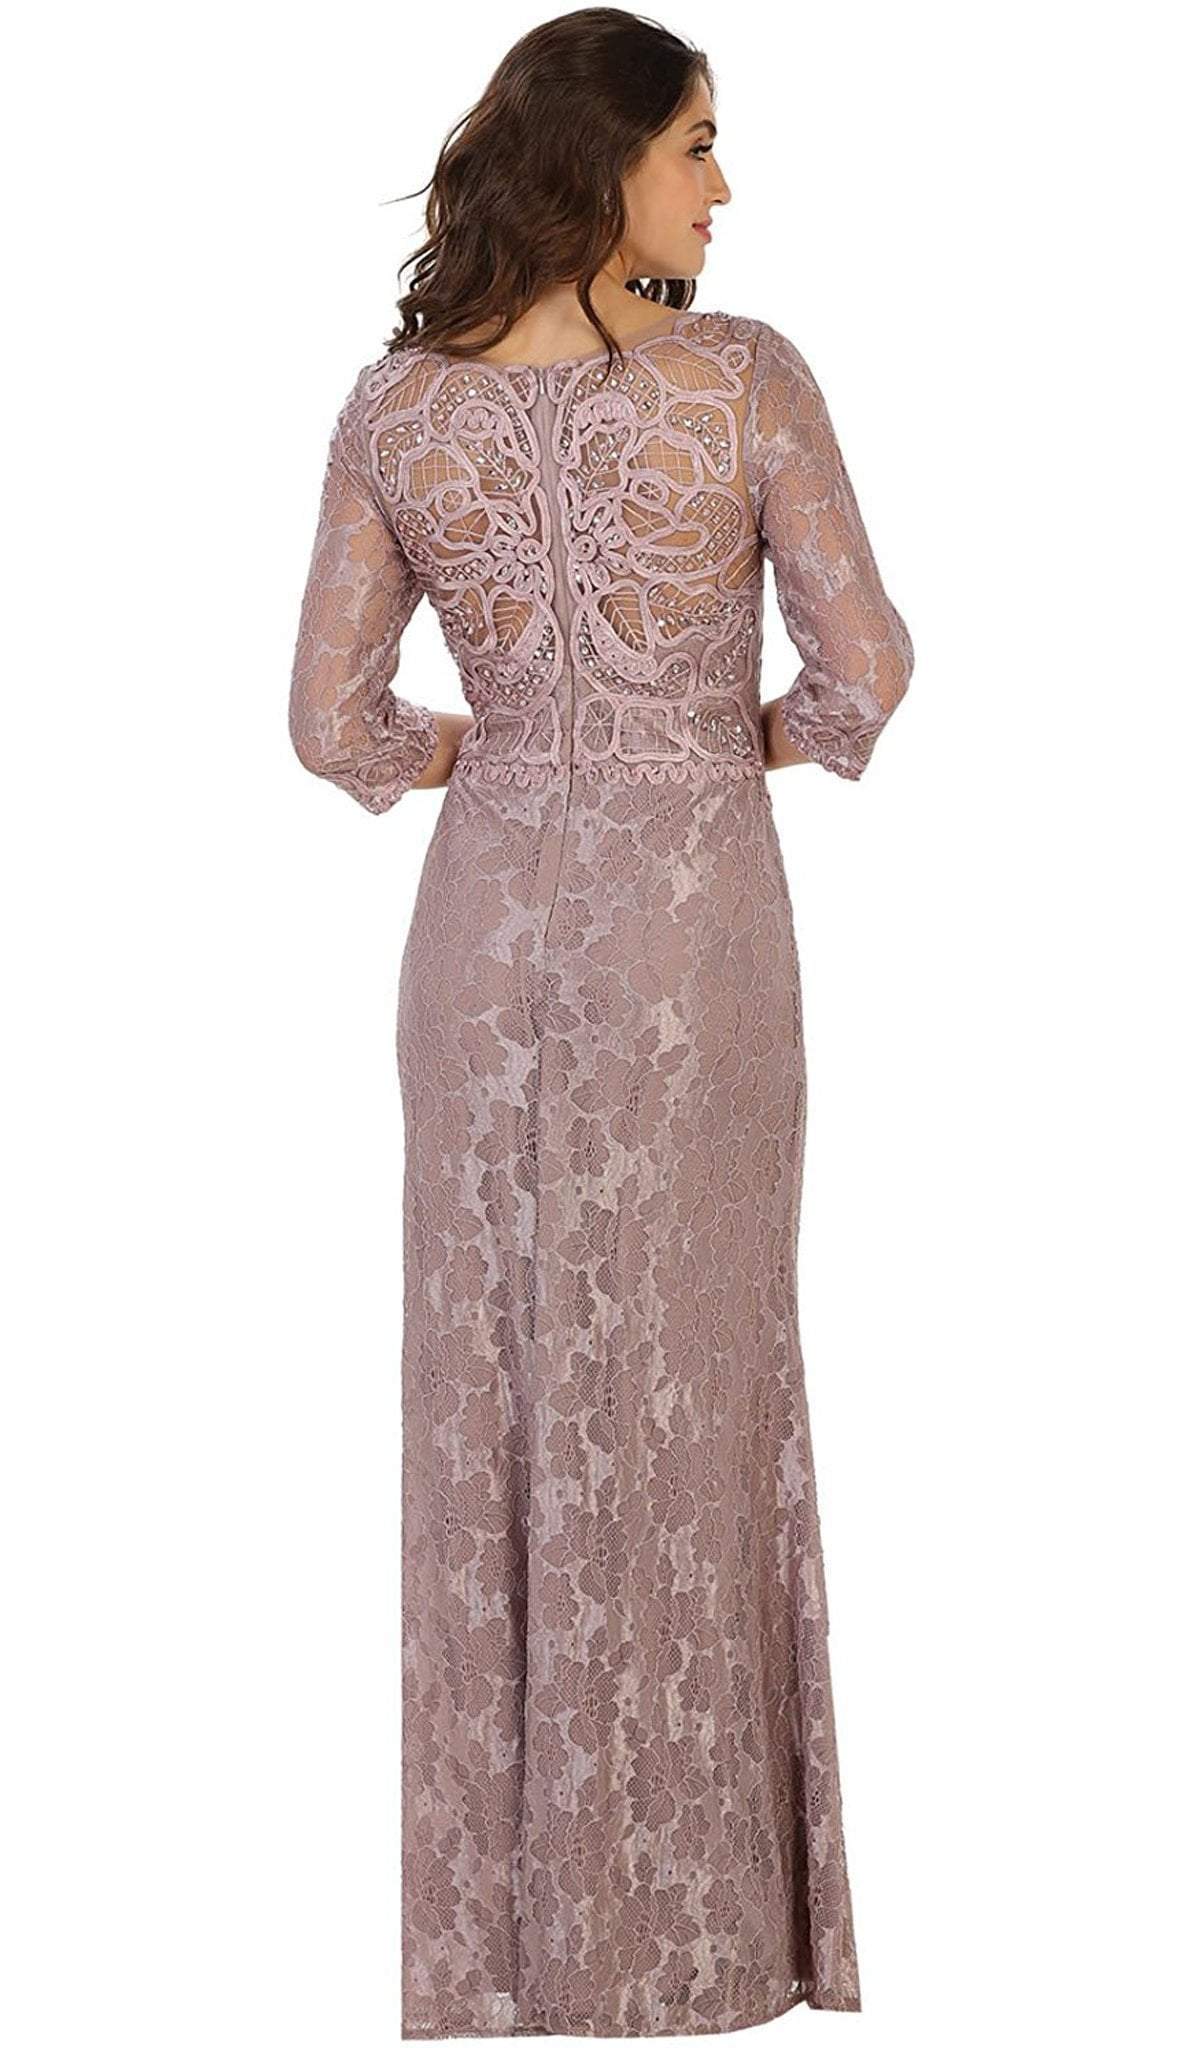 May Queen - Quarter Length Sleeve Lace Evening Dress Special Occasion Dress